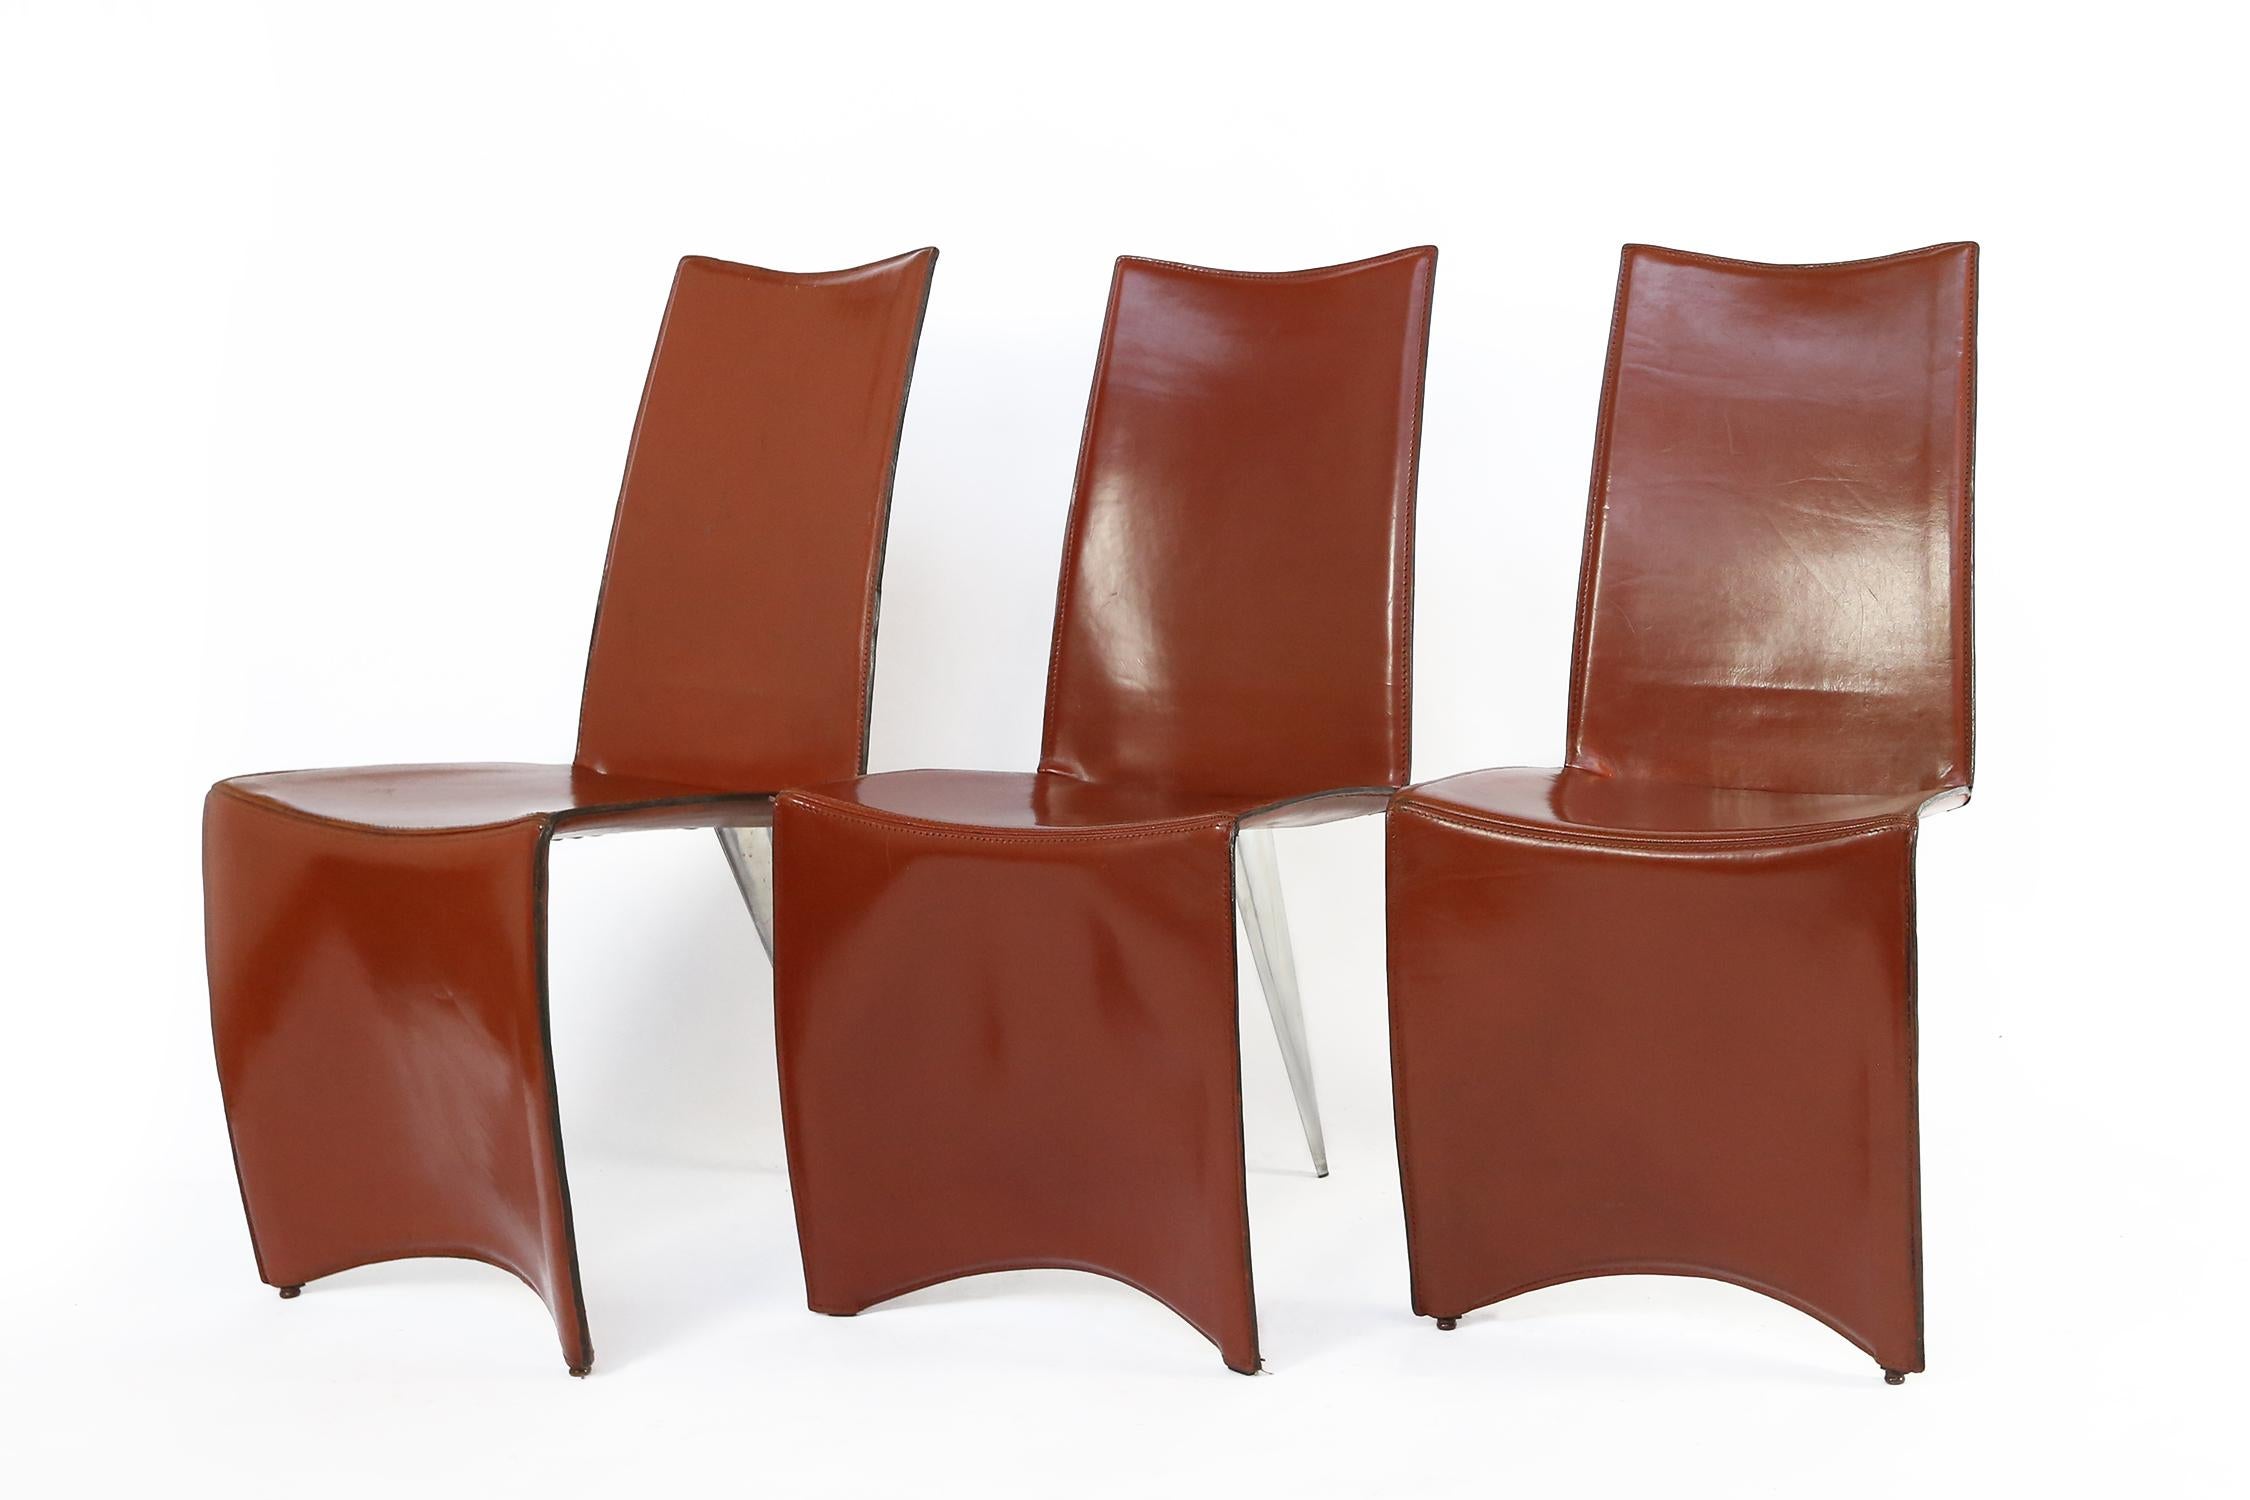 Italian Set of Six Cognac Leather �‘Ed Archer' Chairs by Philippe Starck for Aleph, Italy